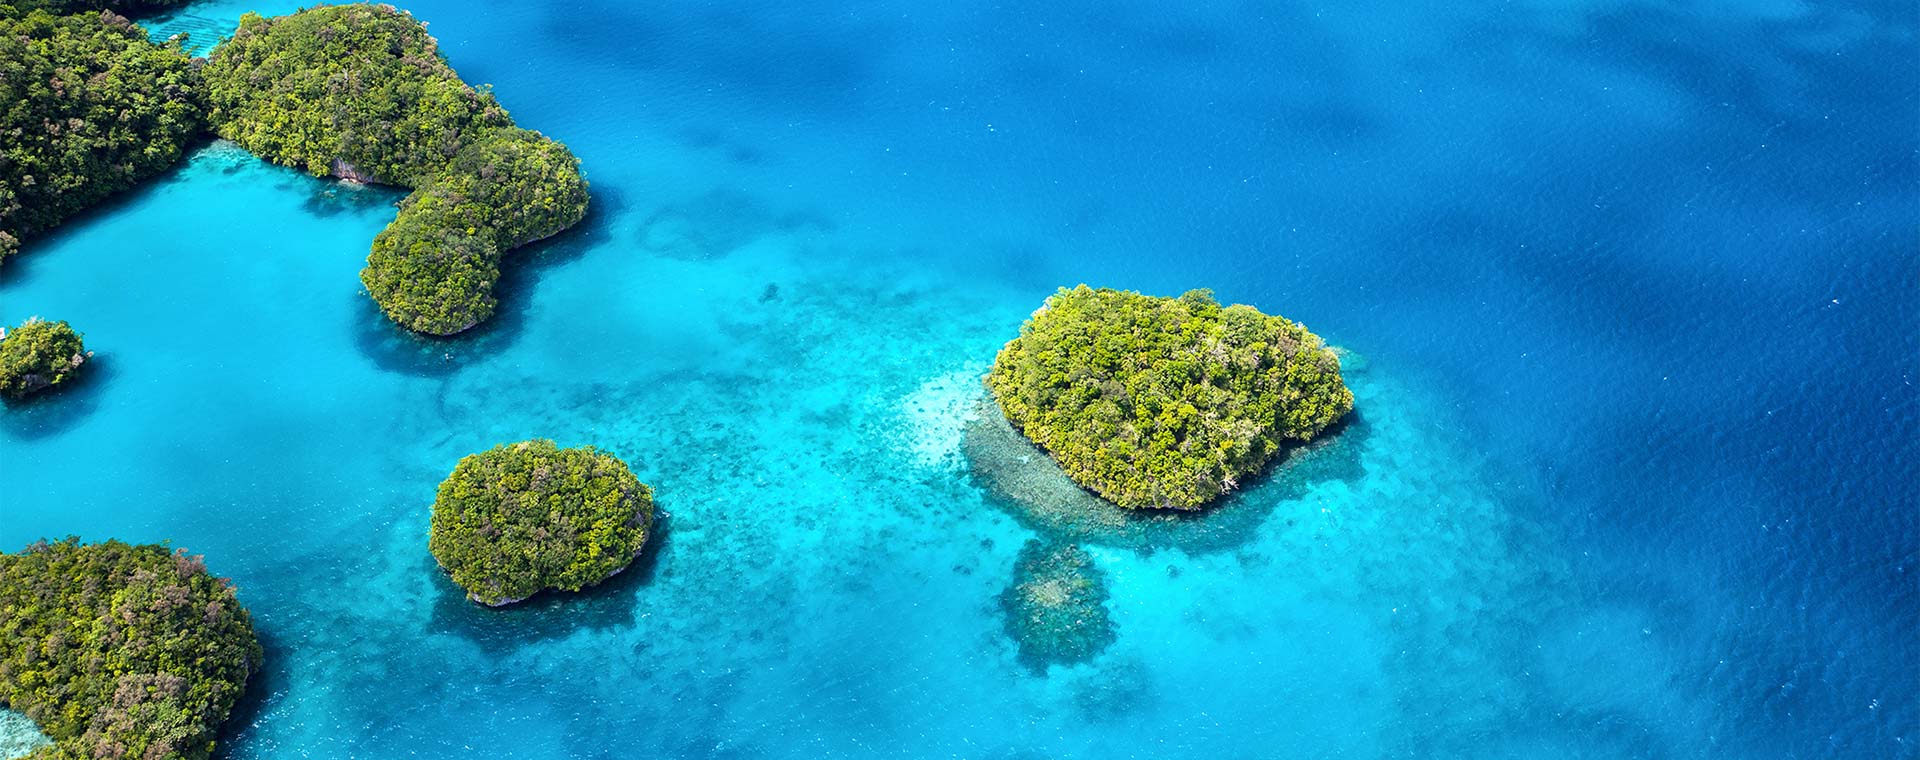 Small, lush, tree filled islands as seen from above, surrounded by brilliant blue water